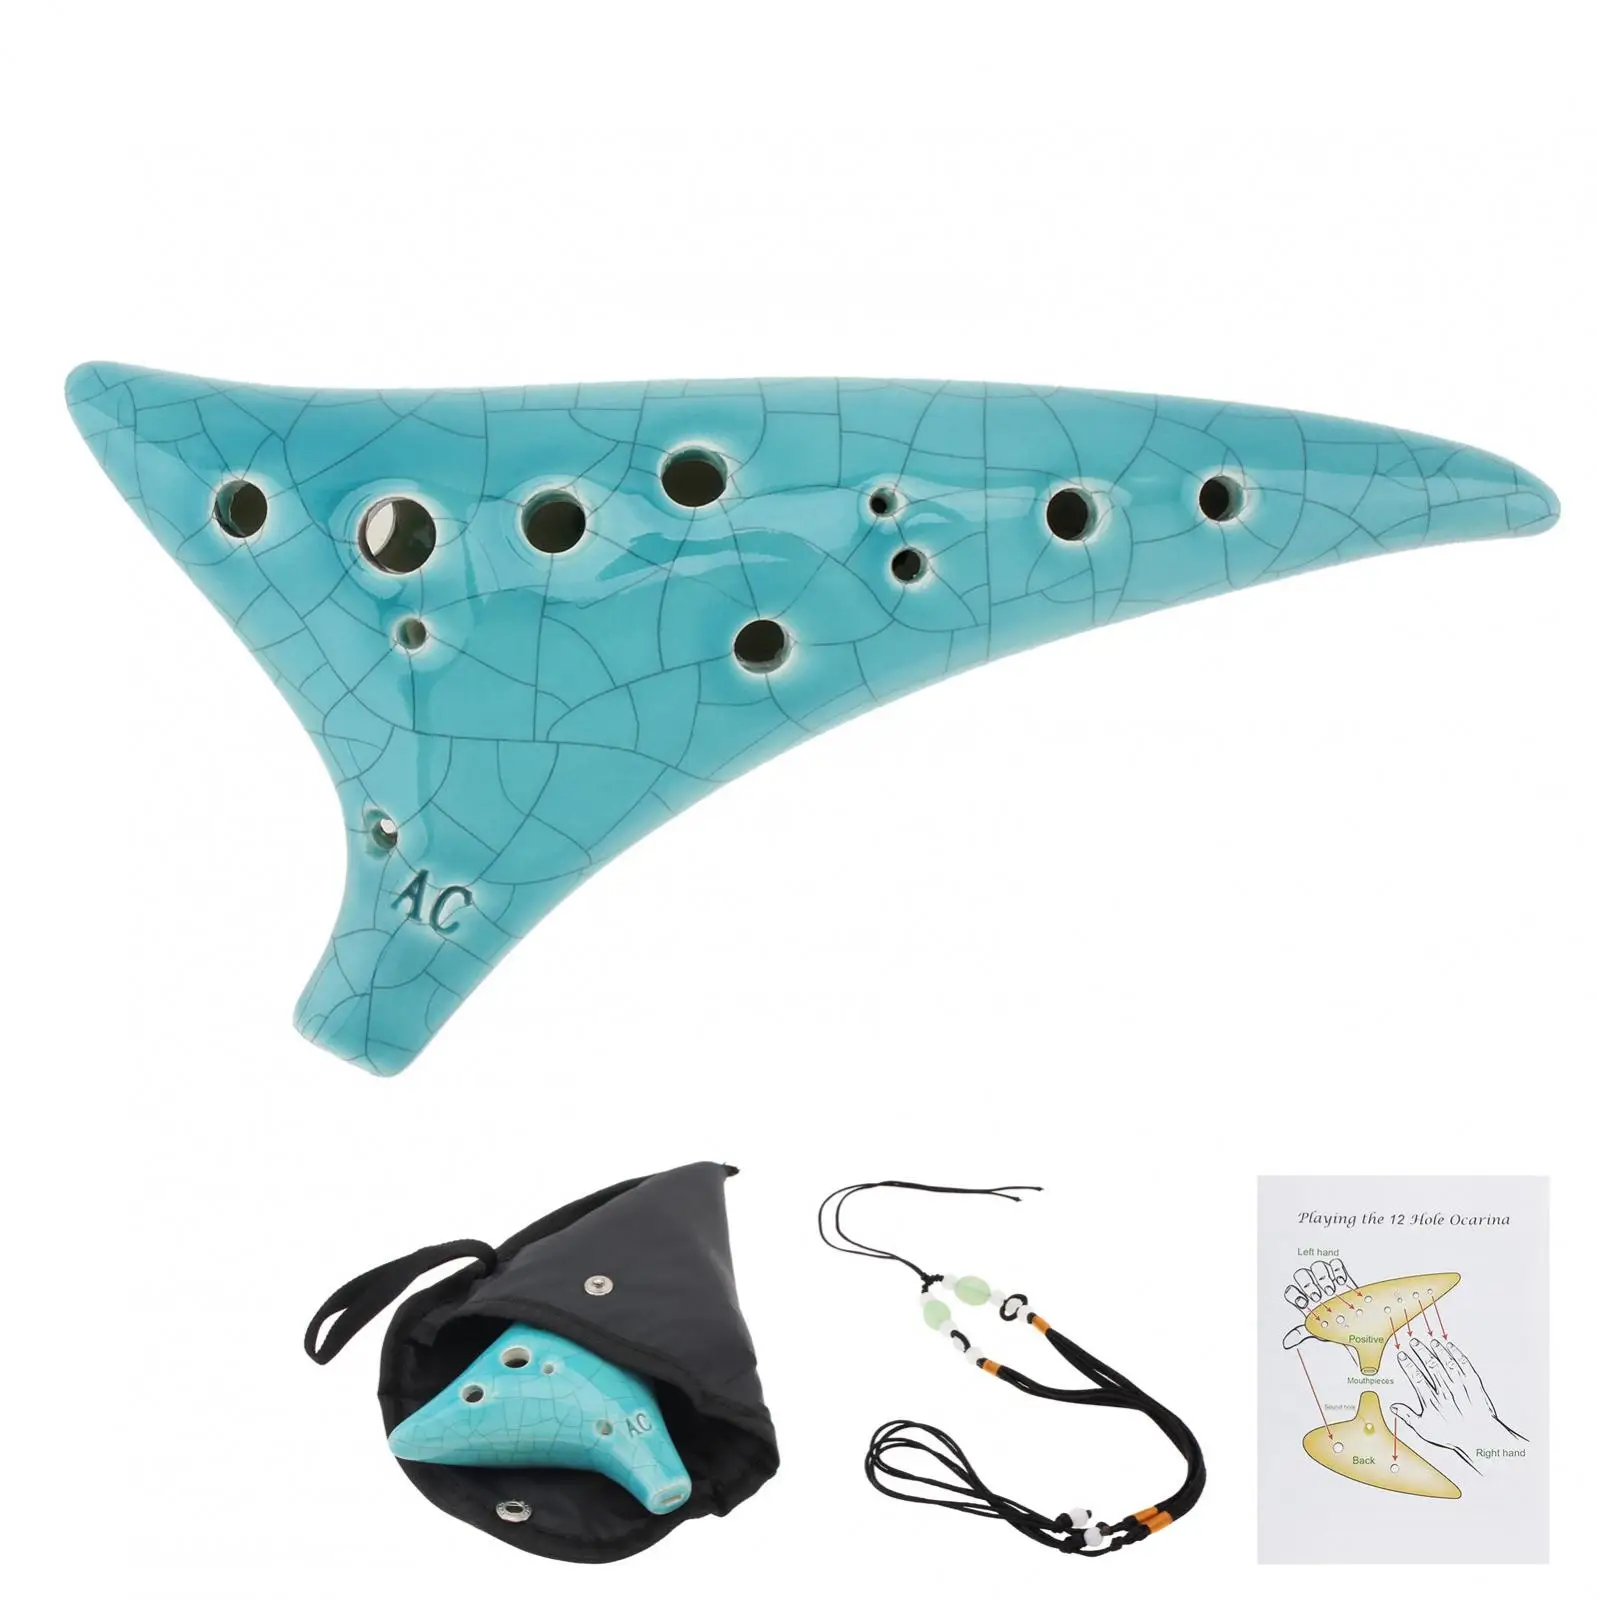 

12 Holes Alto ToneC Ceramic Ocarina Gift Musical Instrument for Children / Adults/Beginners with Song Book Neck Cord Carry Bag